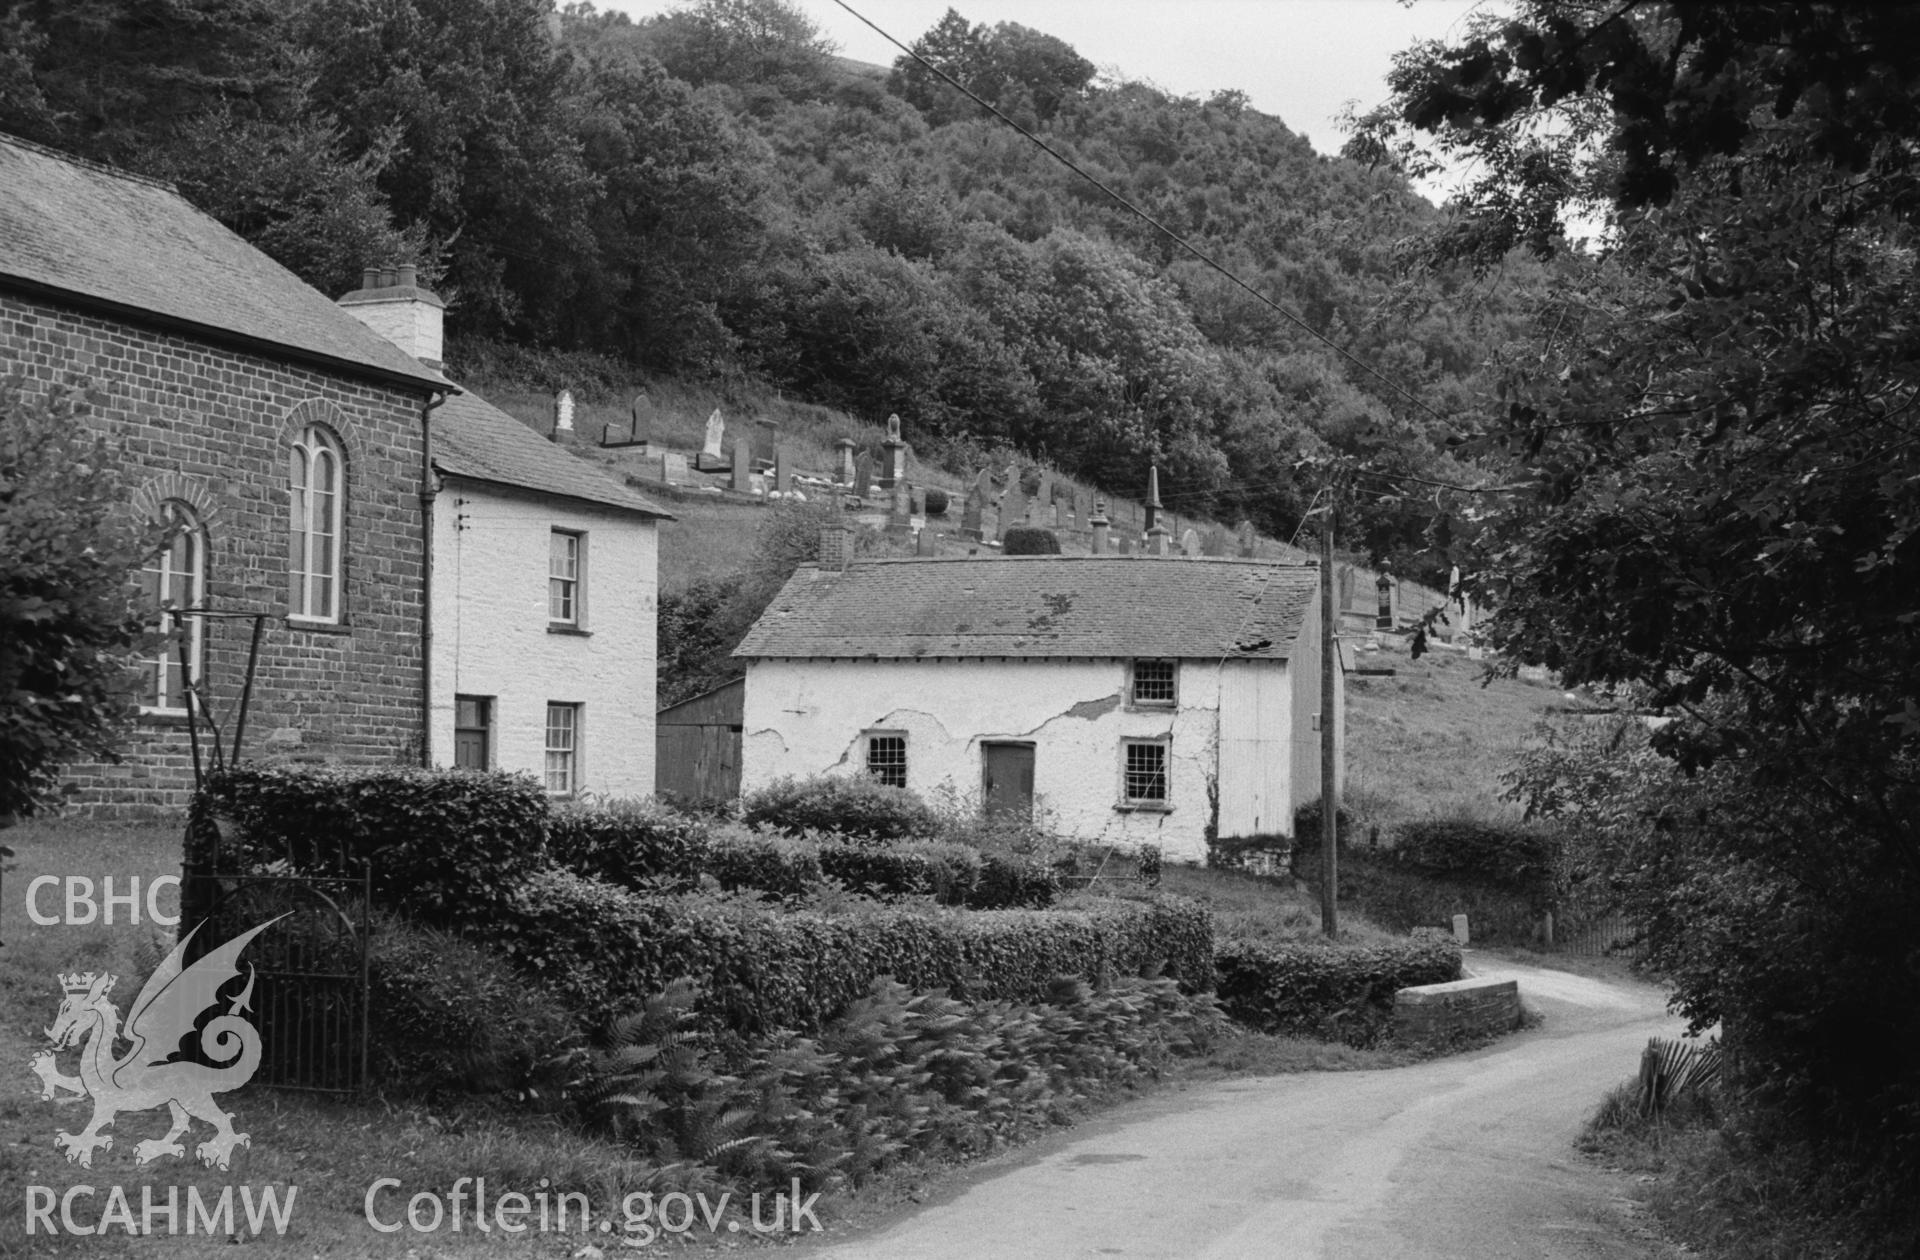 Digital copy of a black and white negative showing exterior view of Capel Iaf and old partly mud-walled cottage, Abermeurig. Photographed by Arthur O. Chater in September 1964 from Grid Reference SN 5646 5628, looking south south west.